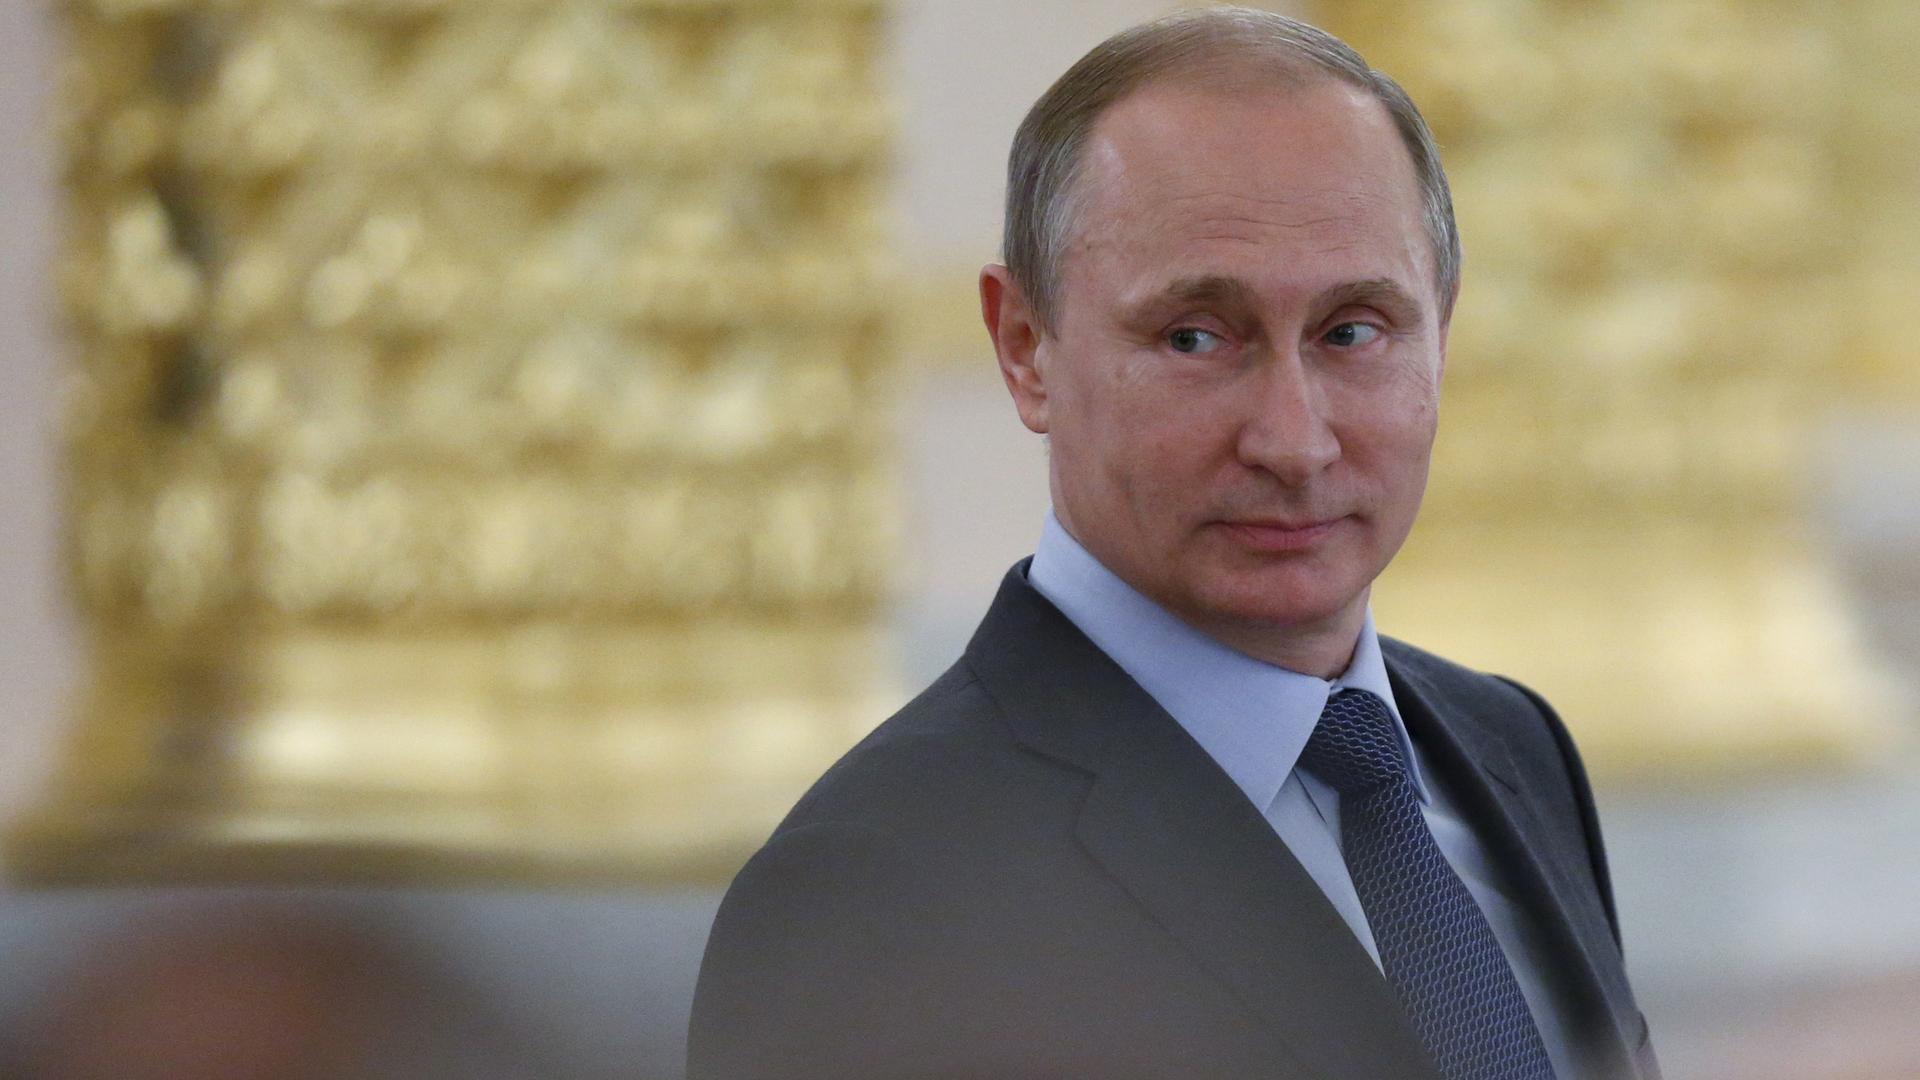 Russian President Vladimir Putin attends a session of the Civic Chamber at the Kremlin in Moscow, Russia, June 2015.